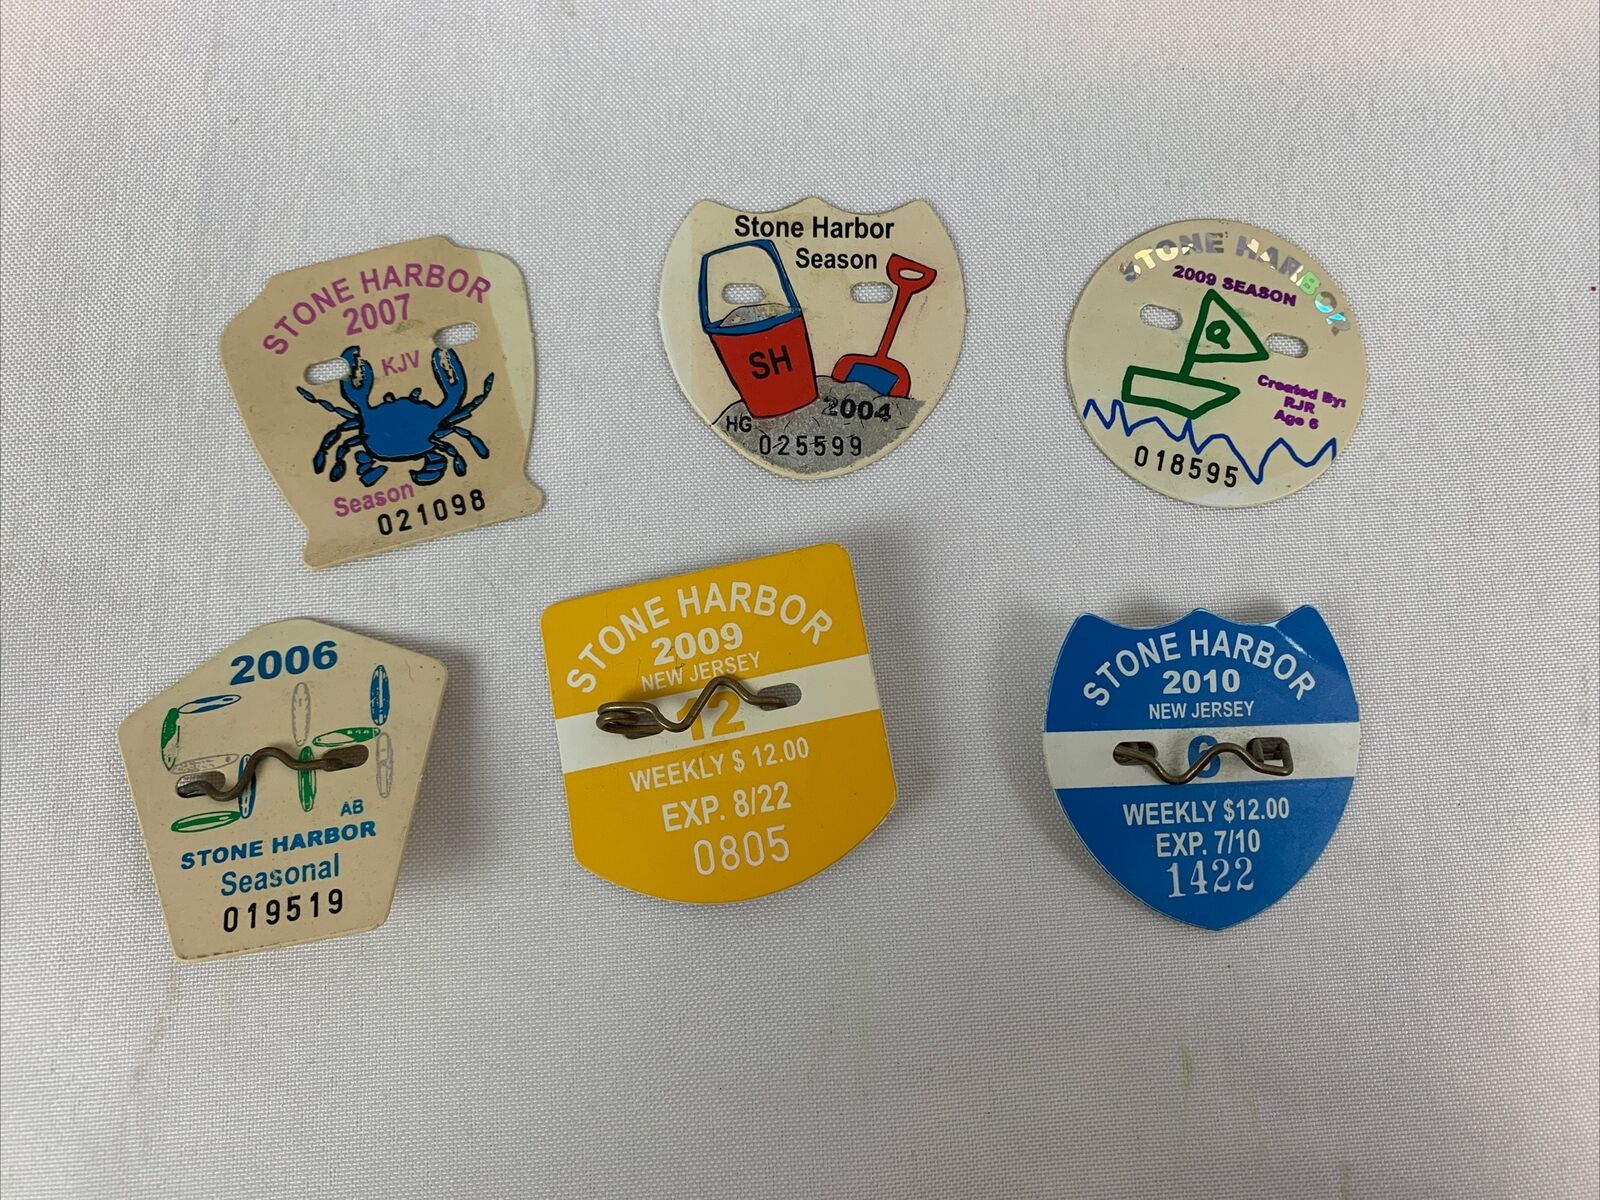 Lot of 6 - Beach Tags for Stone Harbor New Jersey